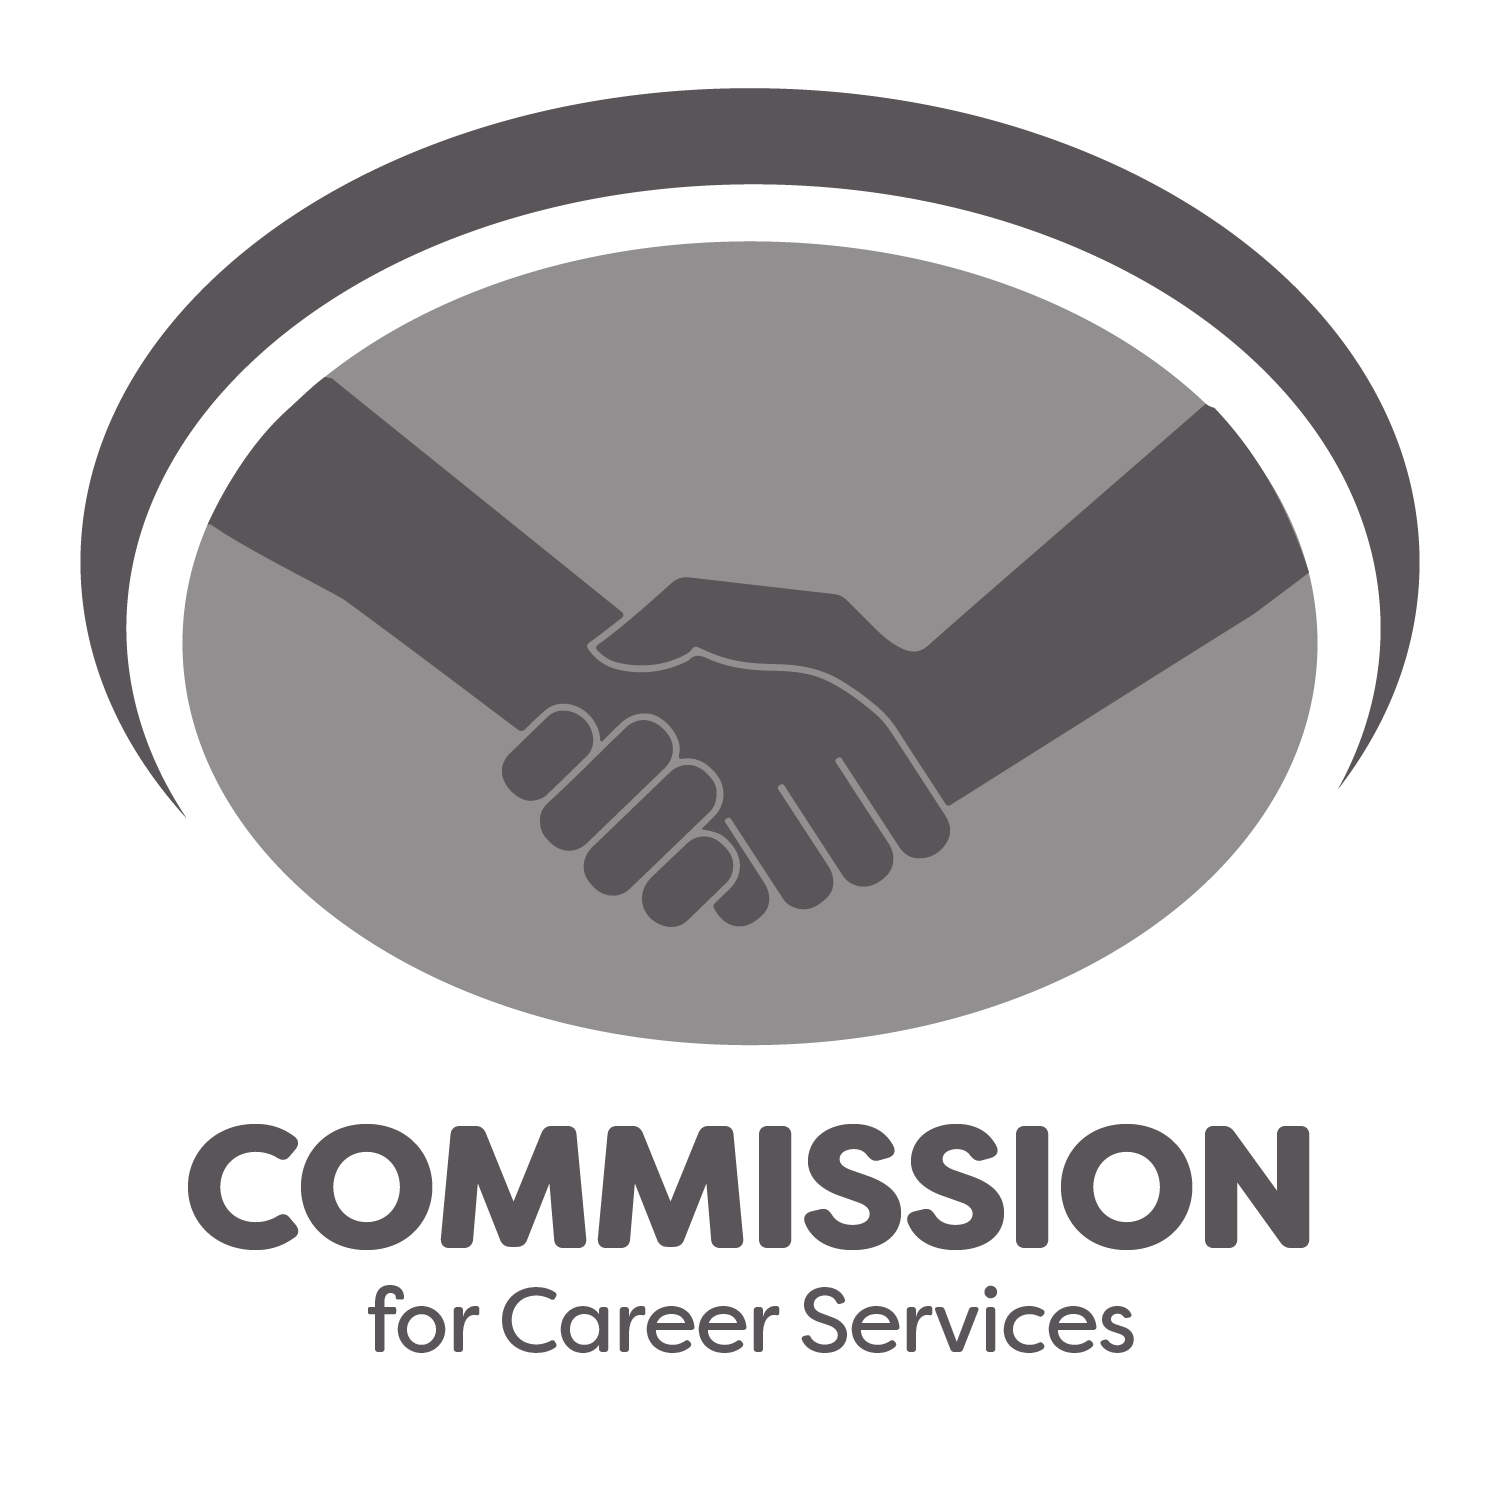 Commission for Career Services logo